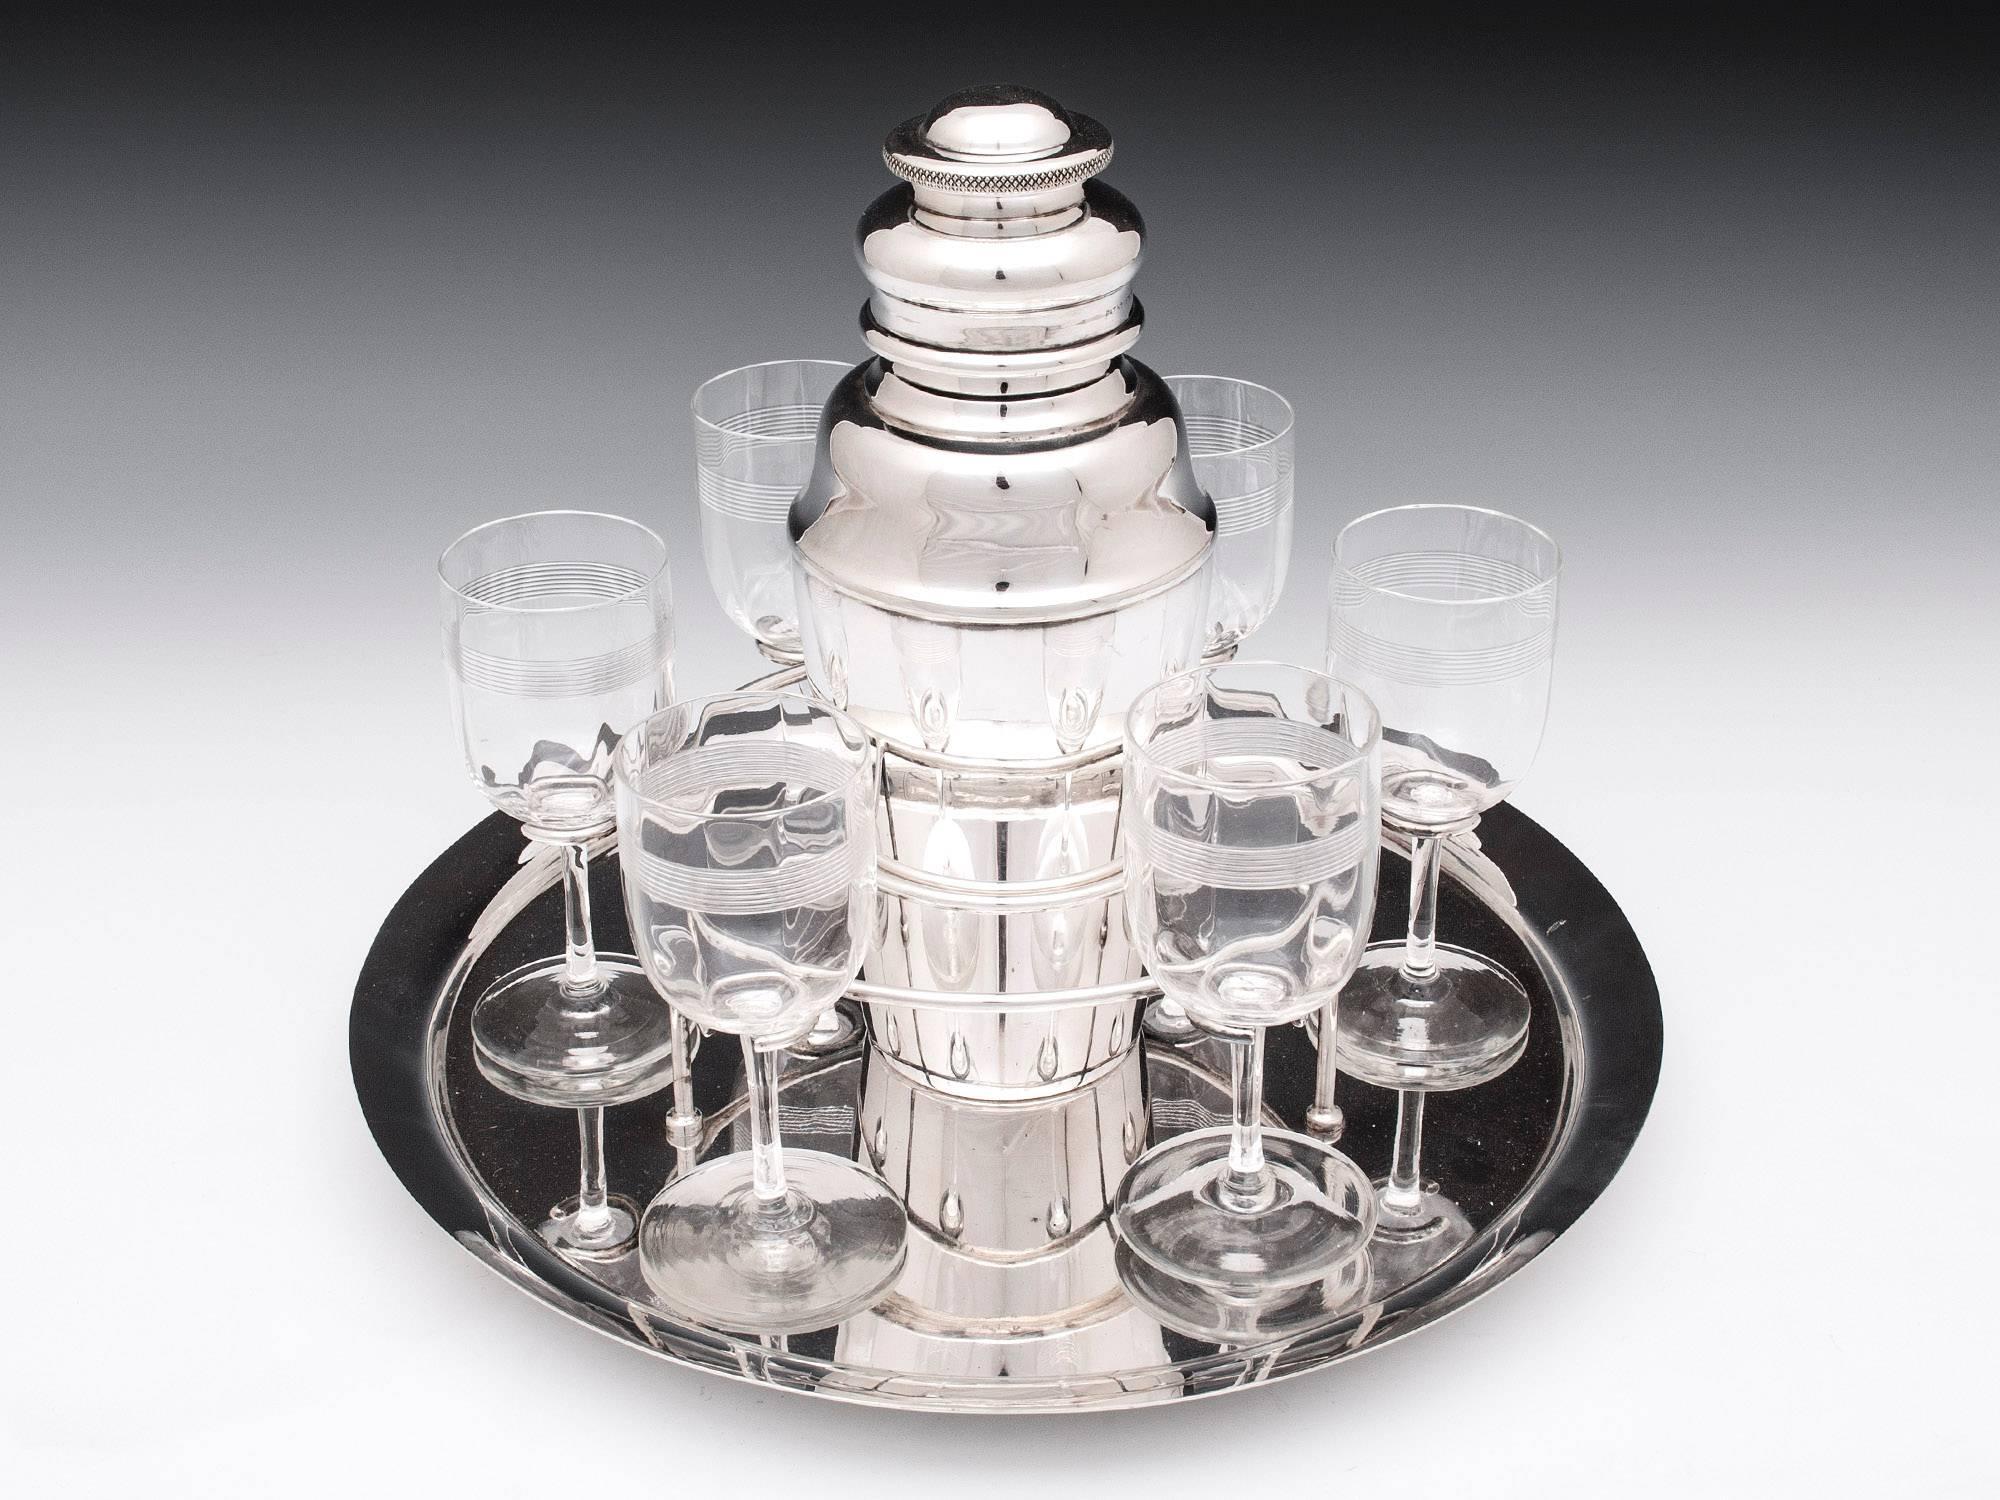 Art Deco silver plated cocktail set by Hukin & Heath complete with a silver plated tray, marked "935", and six glasses. 

Cocktail shaker dimensions: 
Height 8' 
diameter 3.25' 

Glass dimensions: 
Height 4.5' 
diameter 2'